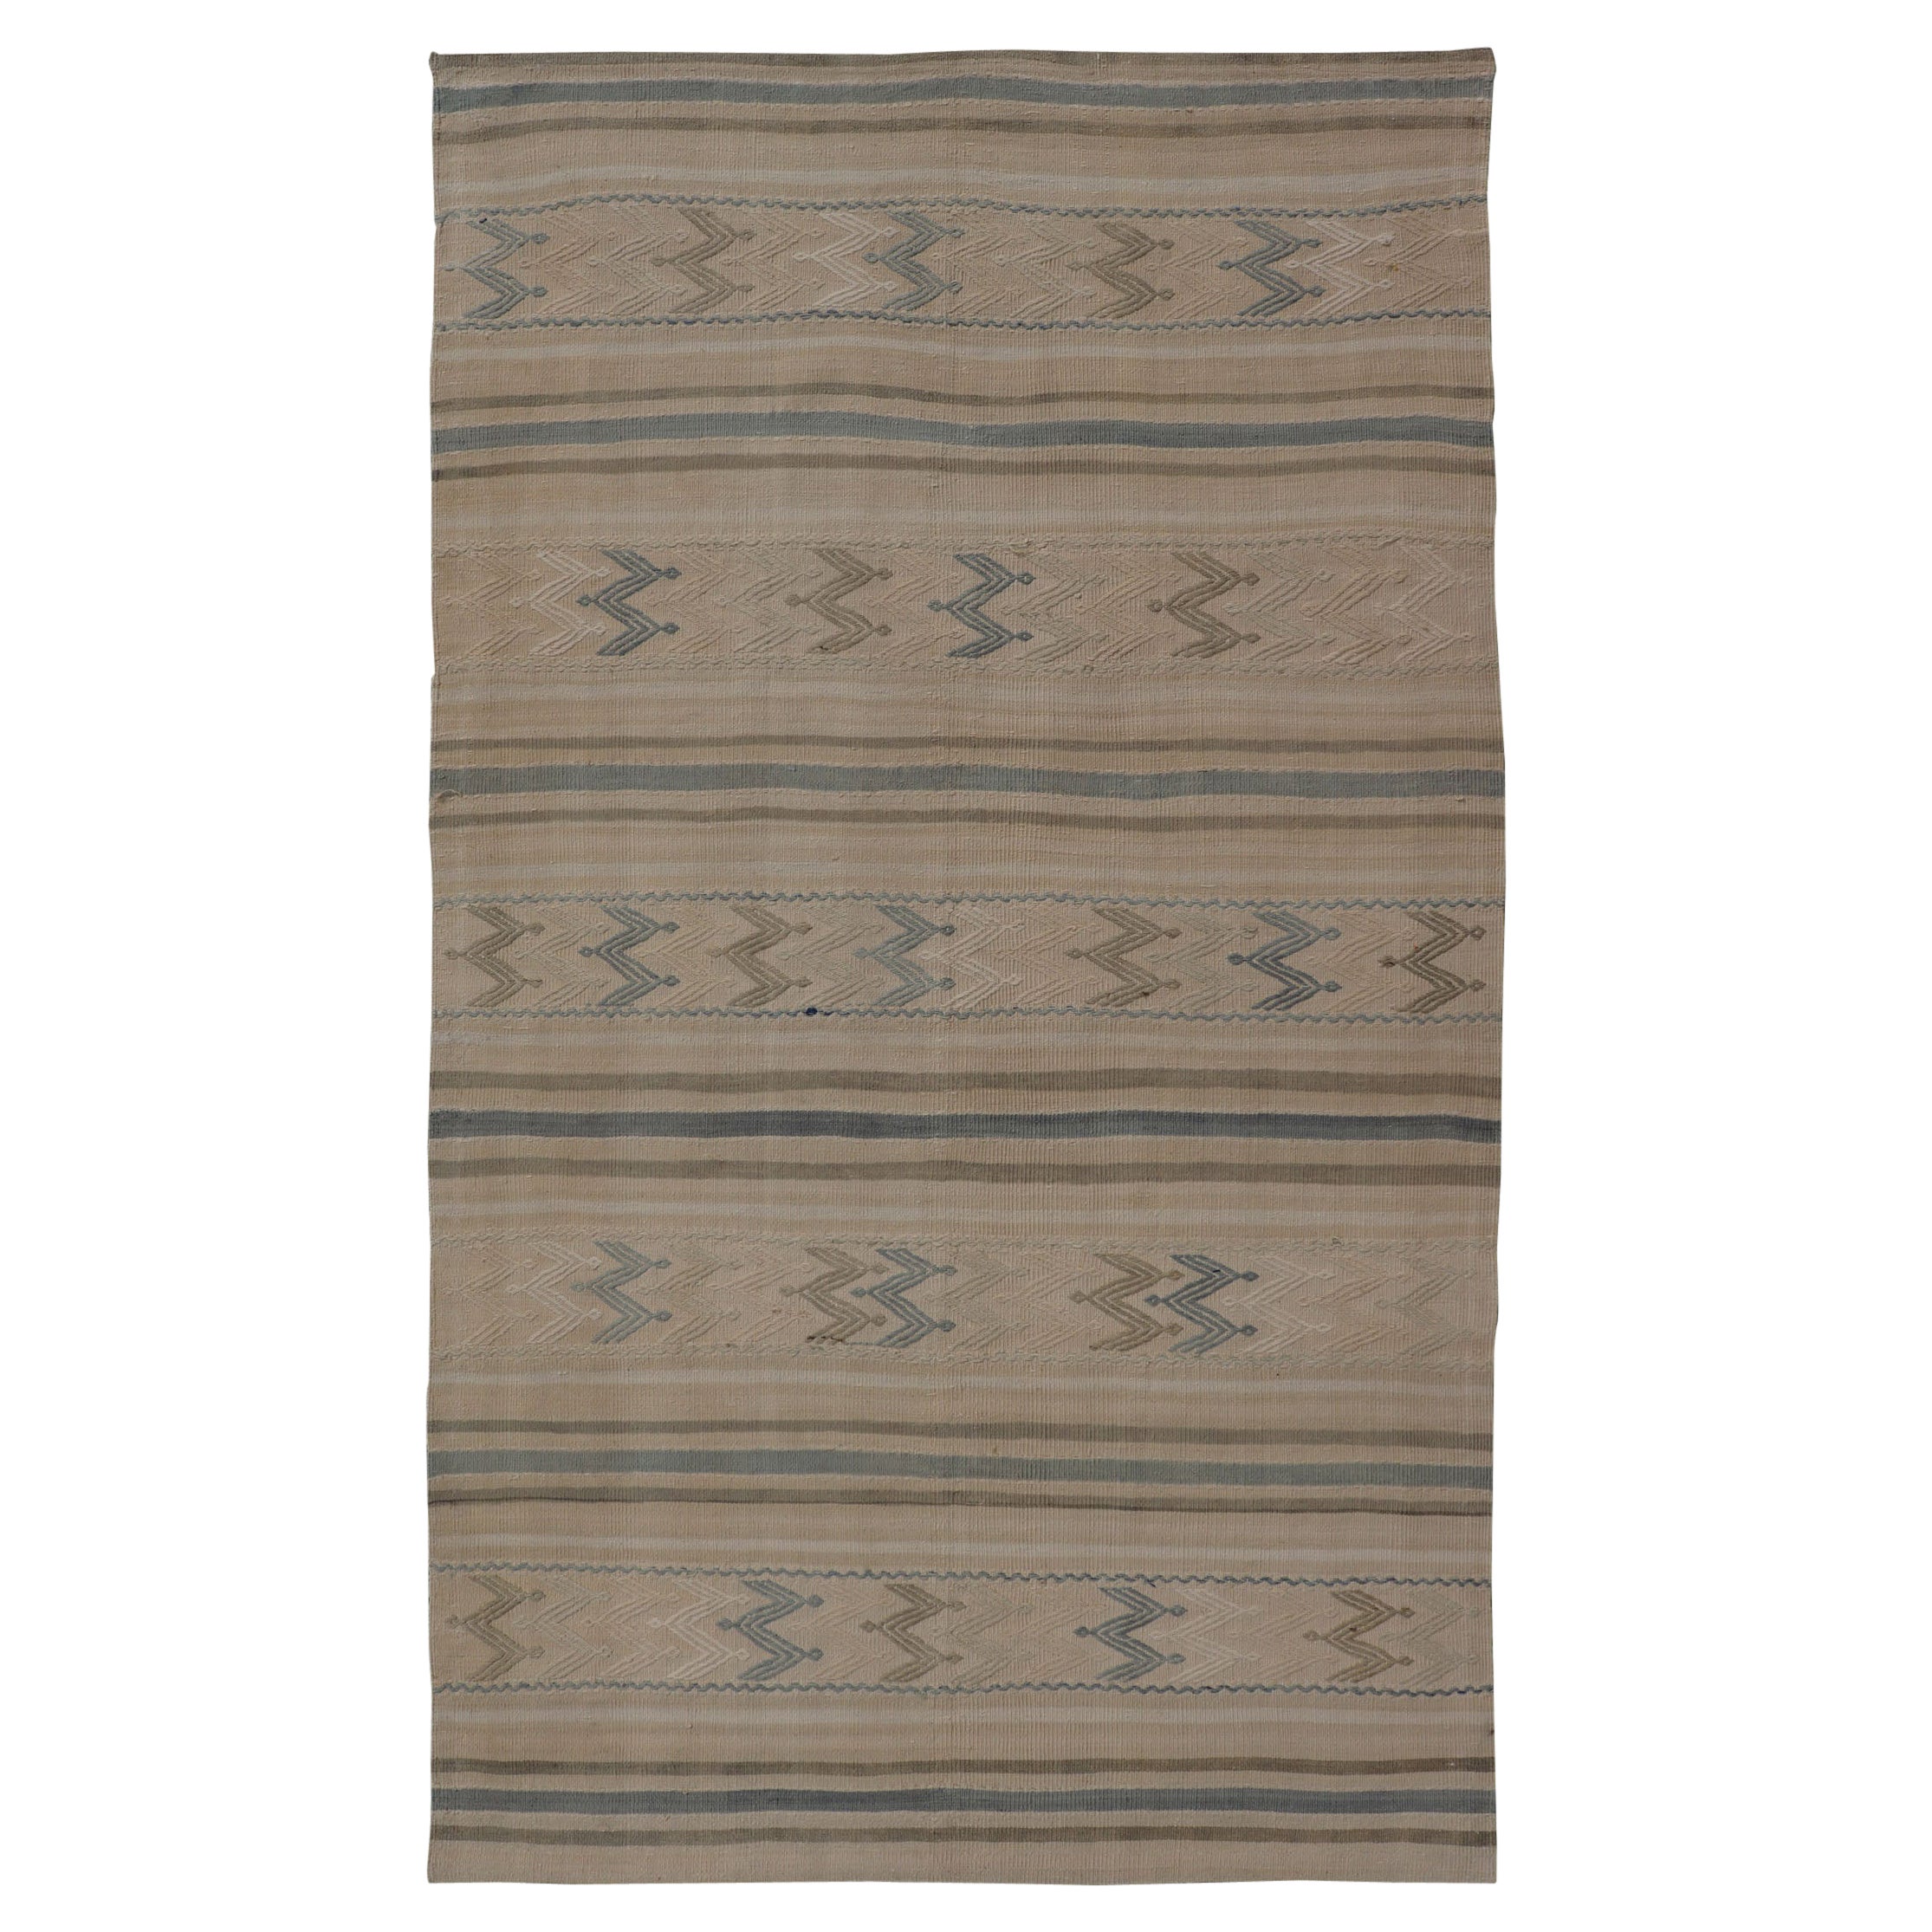 Vintage Turkish Flat-Weave with Embroideries in Earth Tones and Blue